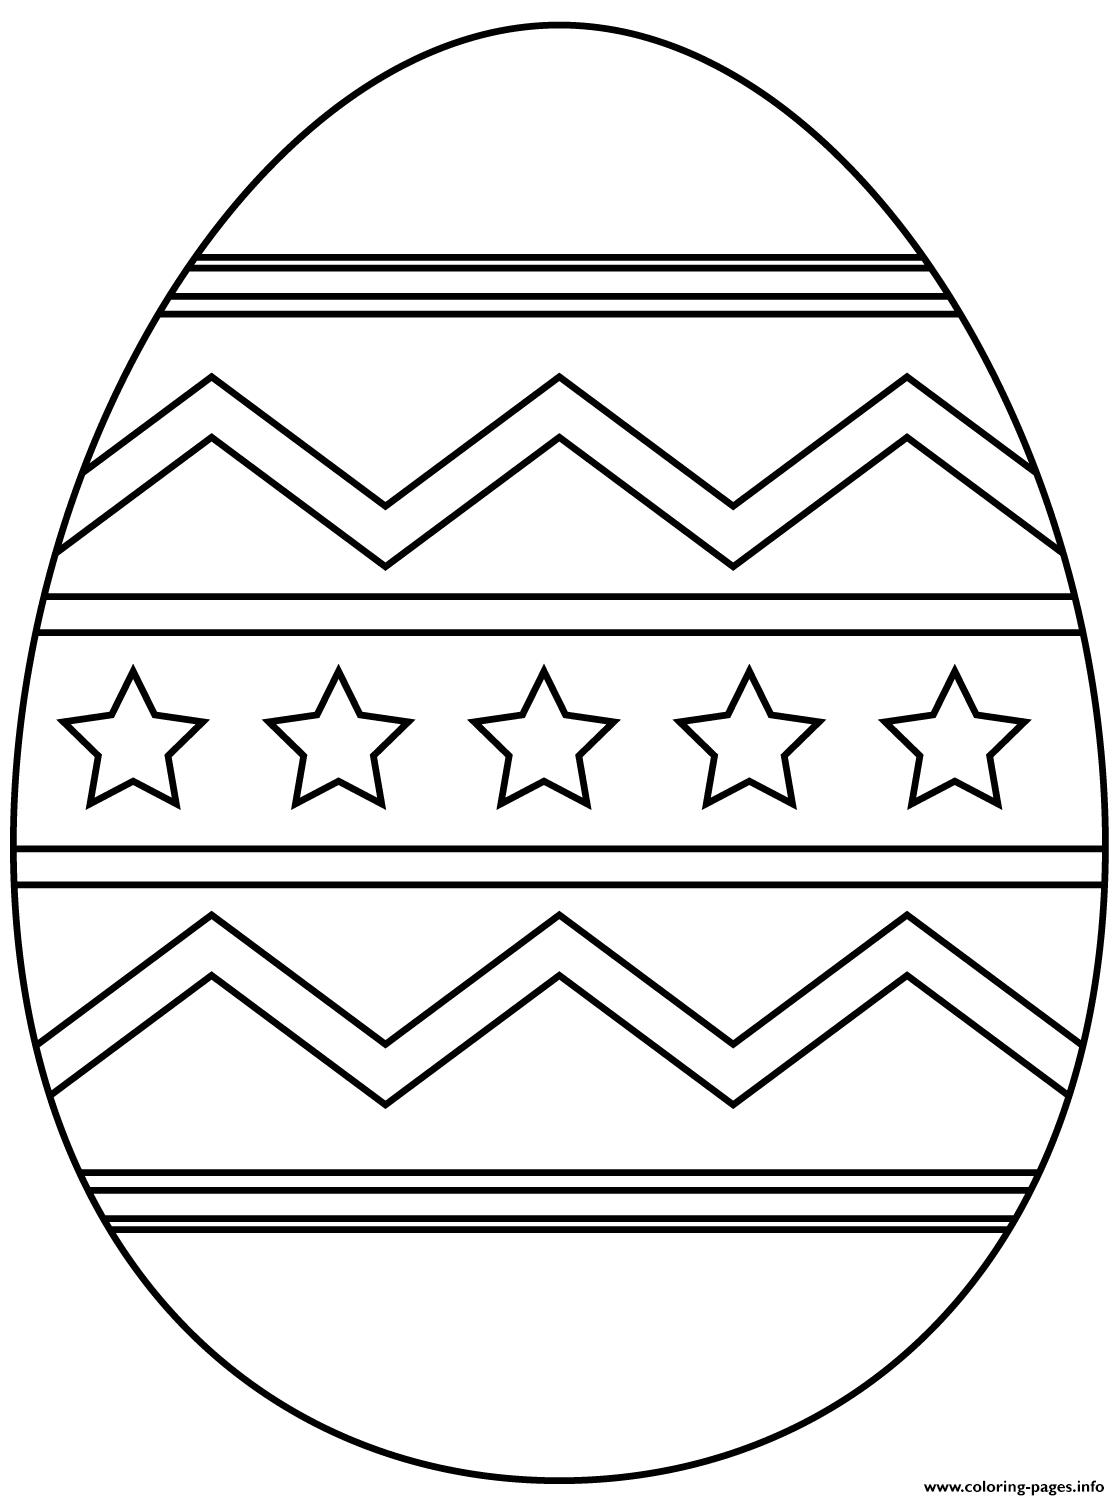 Easter Egg With Abstract Pattern 2 1 coloring